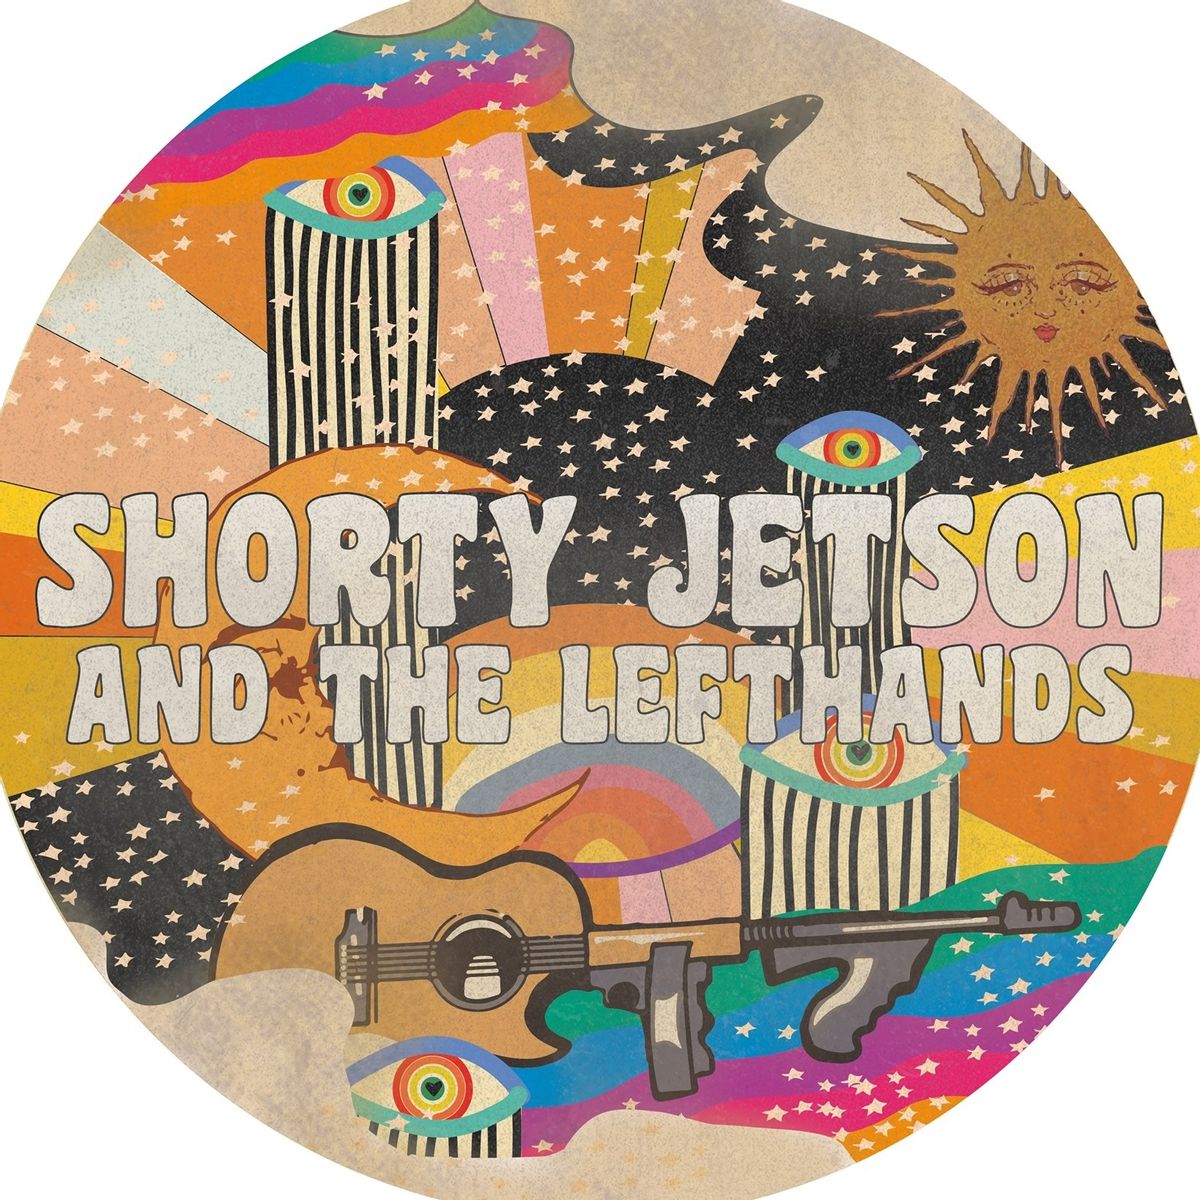 Shorty Jetson  And The Lefthands - Freaks And Runaways